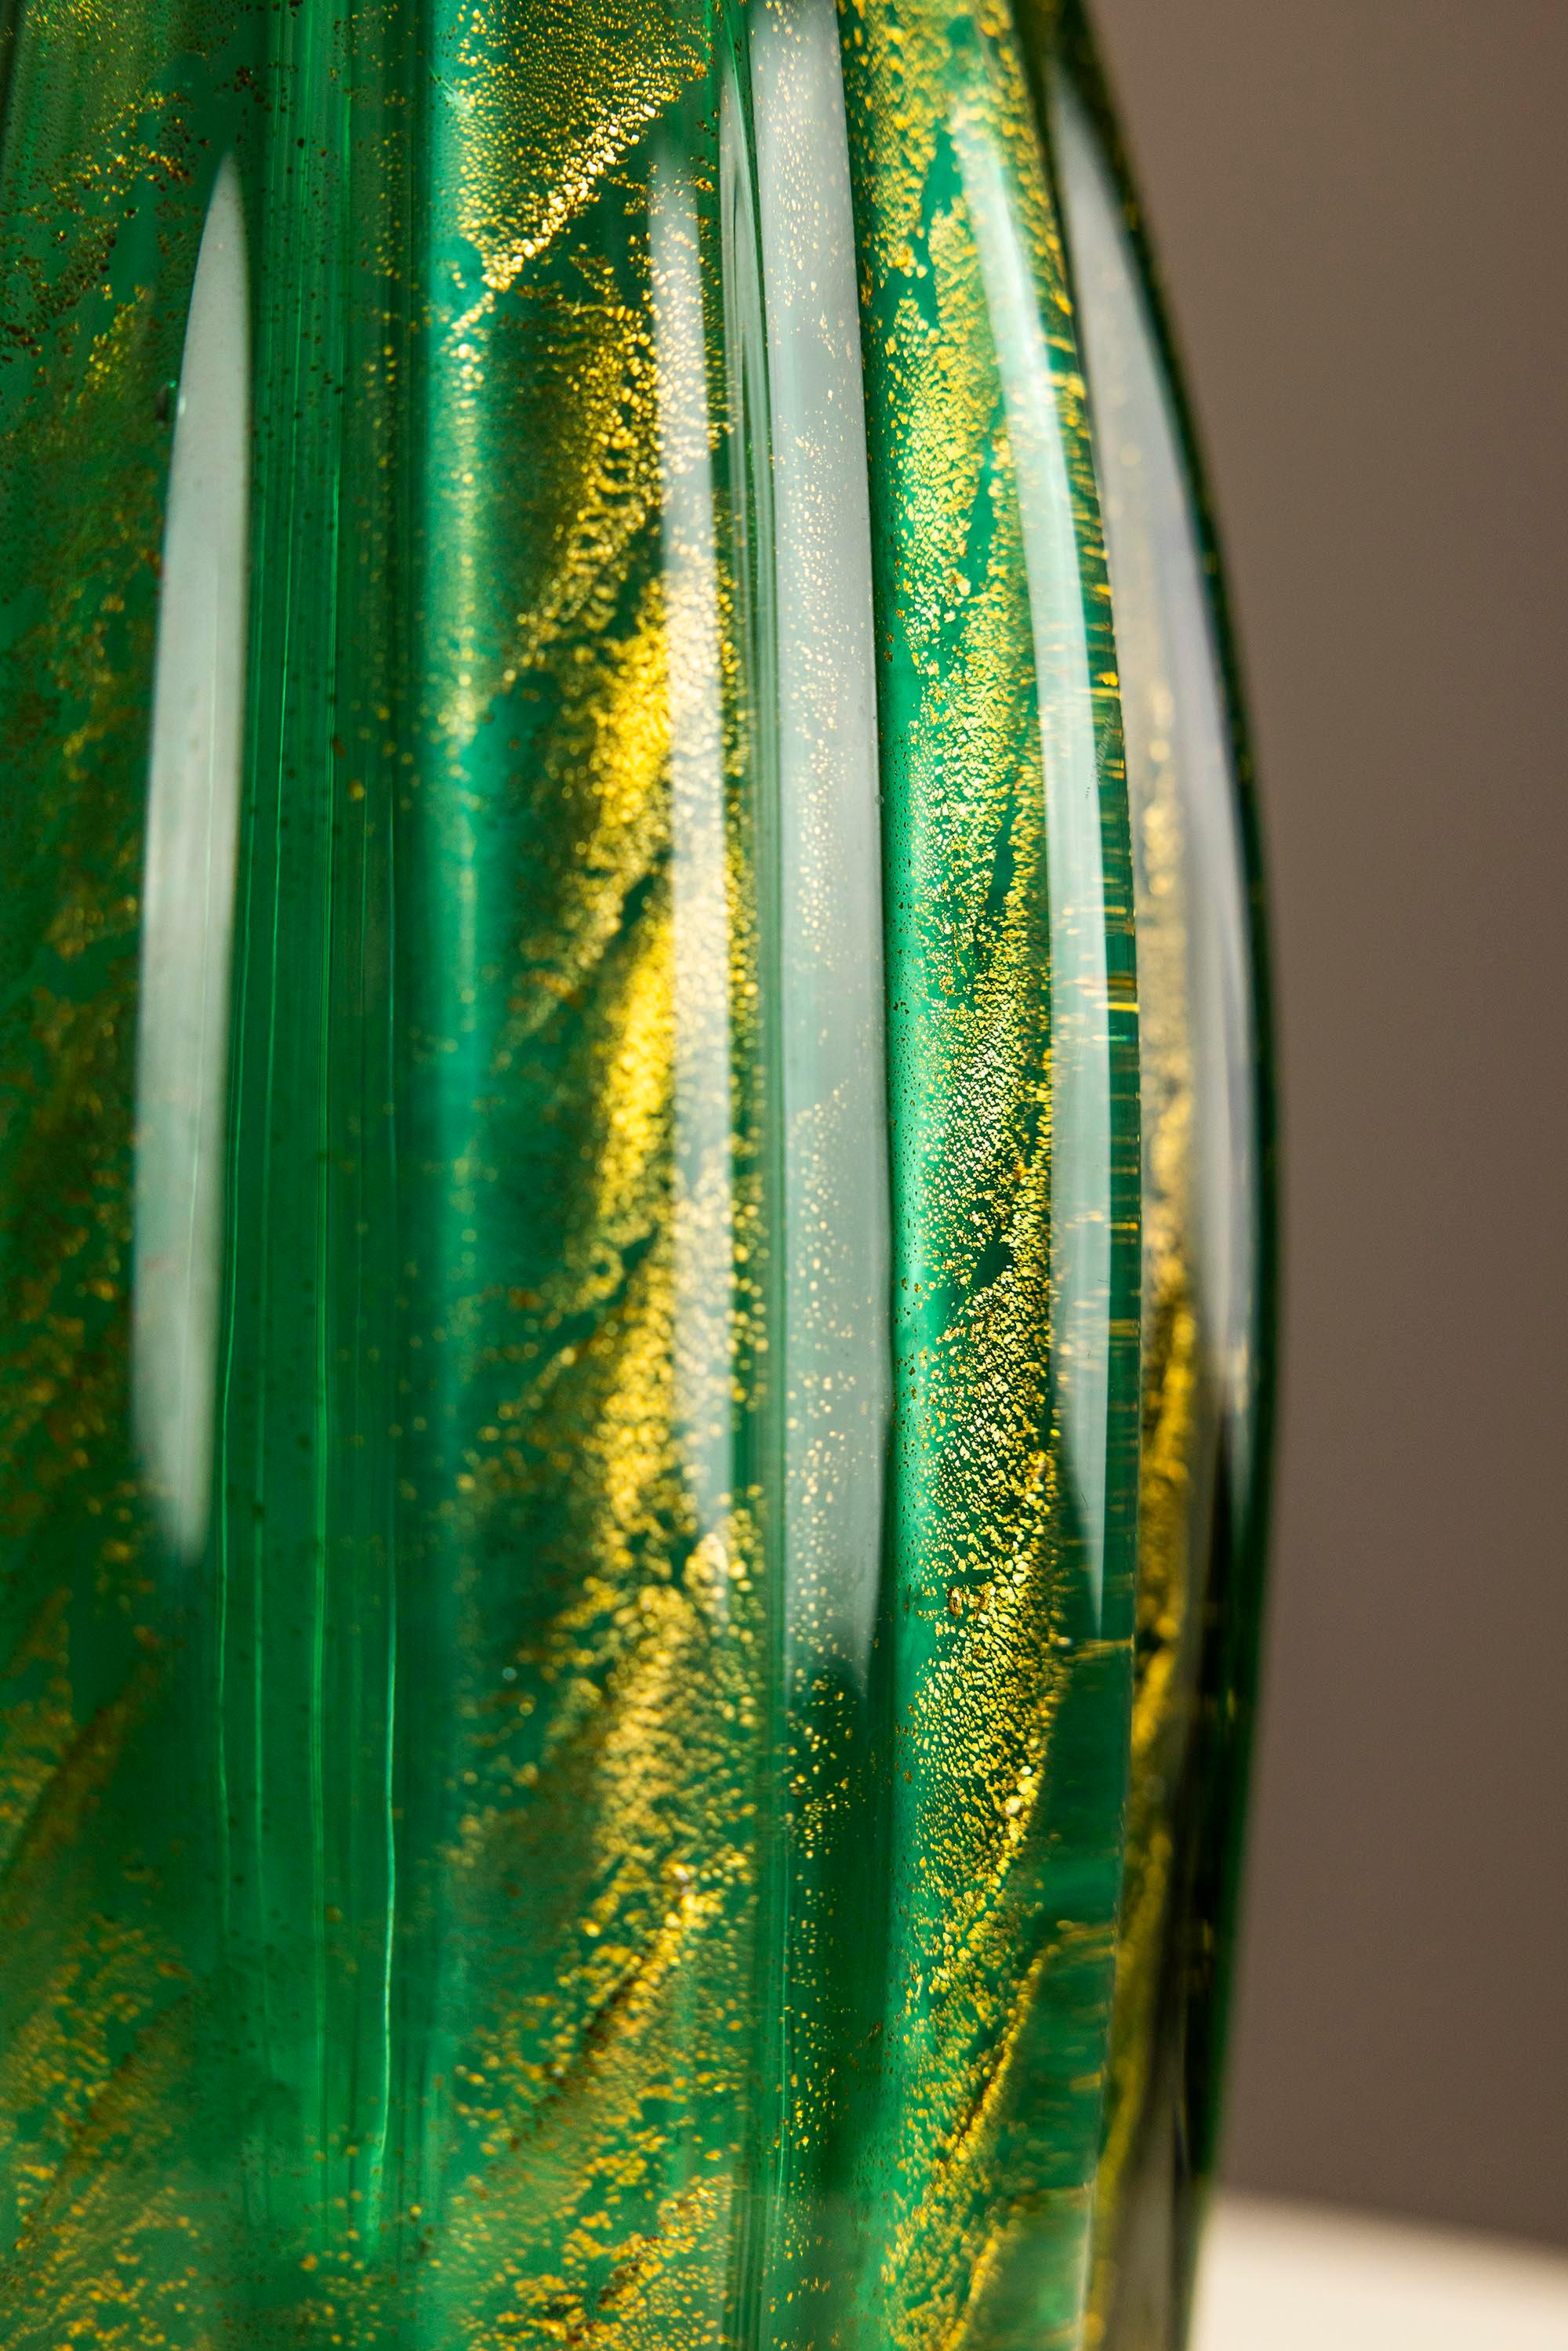 Glass Barovier & Toso Green Oval-shaped Coronato d’Oro Vase, Italy 1930 For Sale